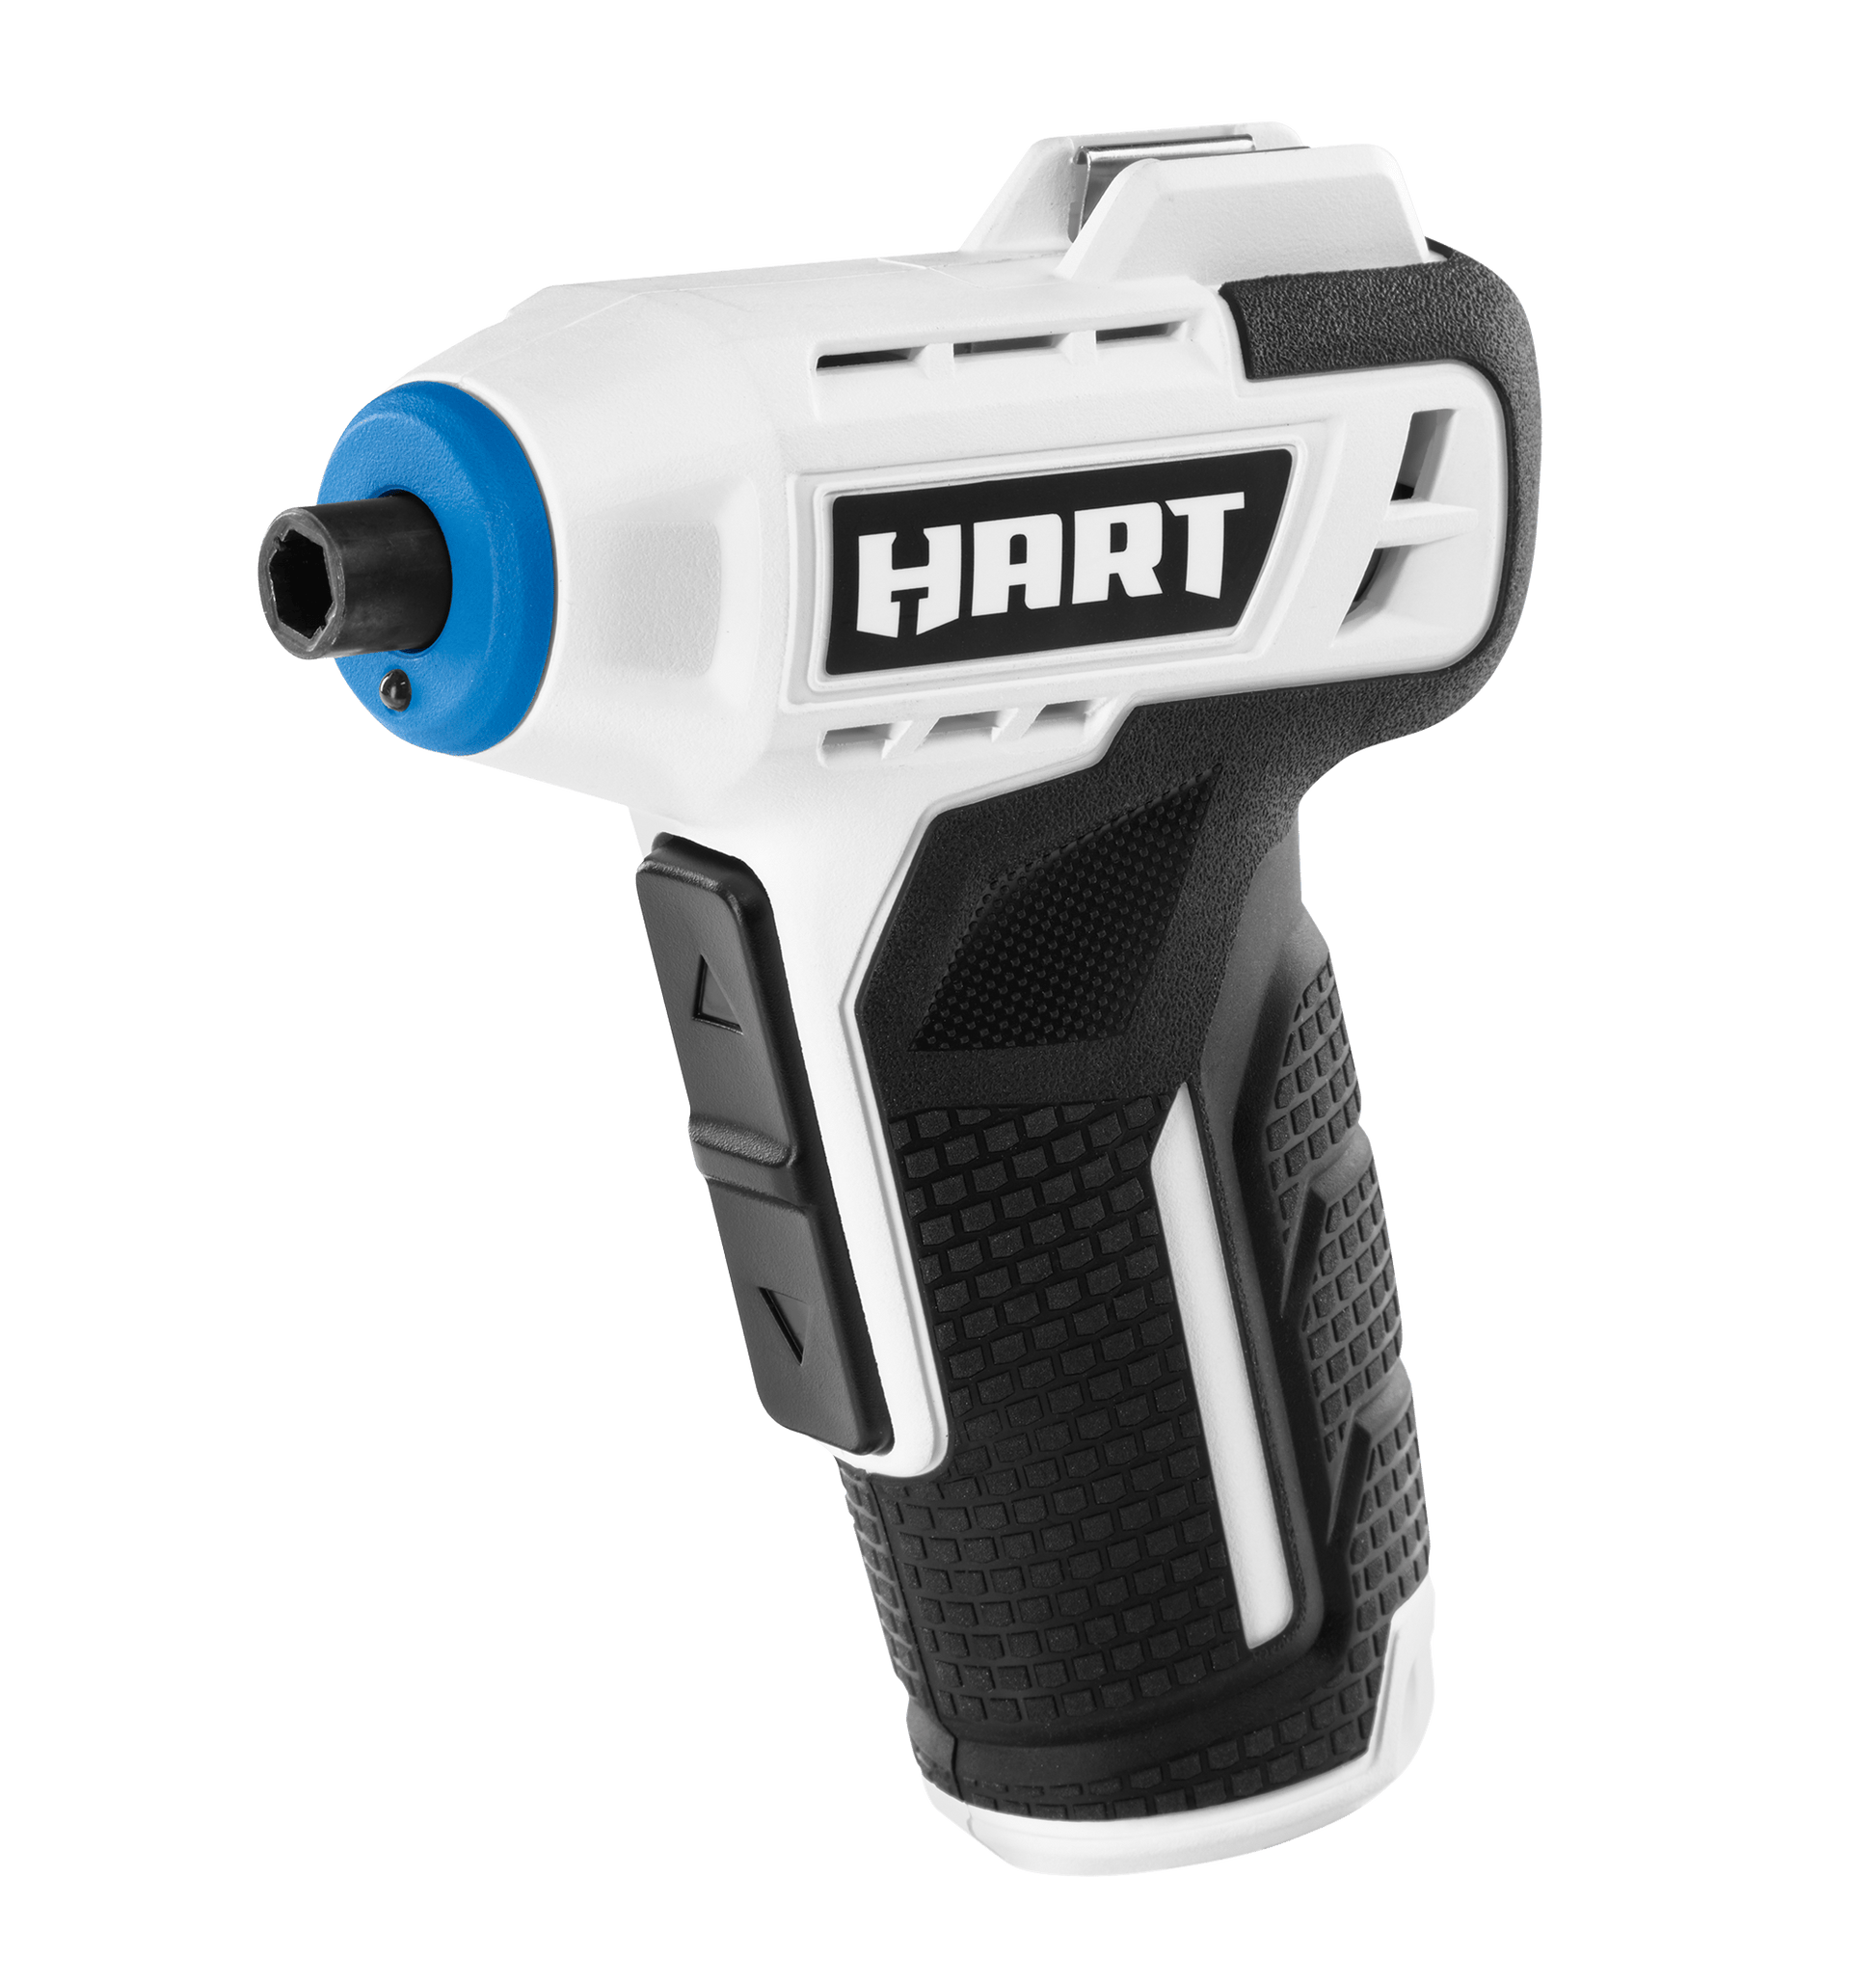 4V Cordless Rechargeable Screwdriver